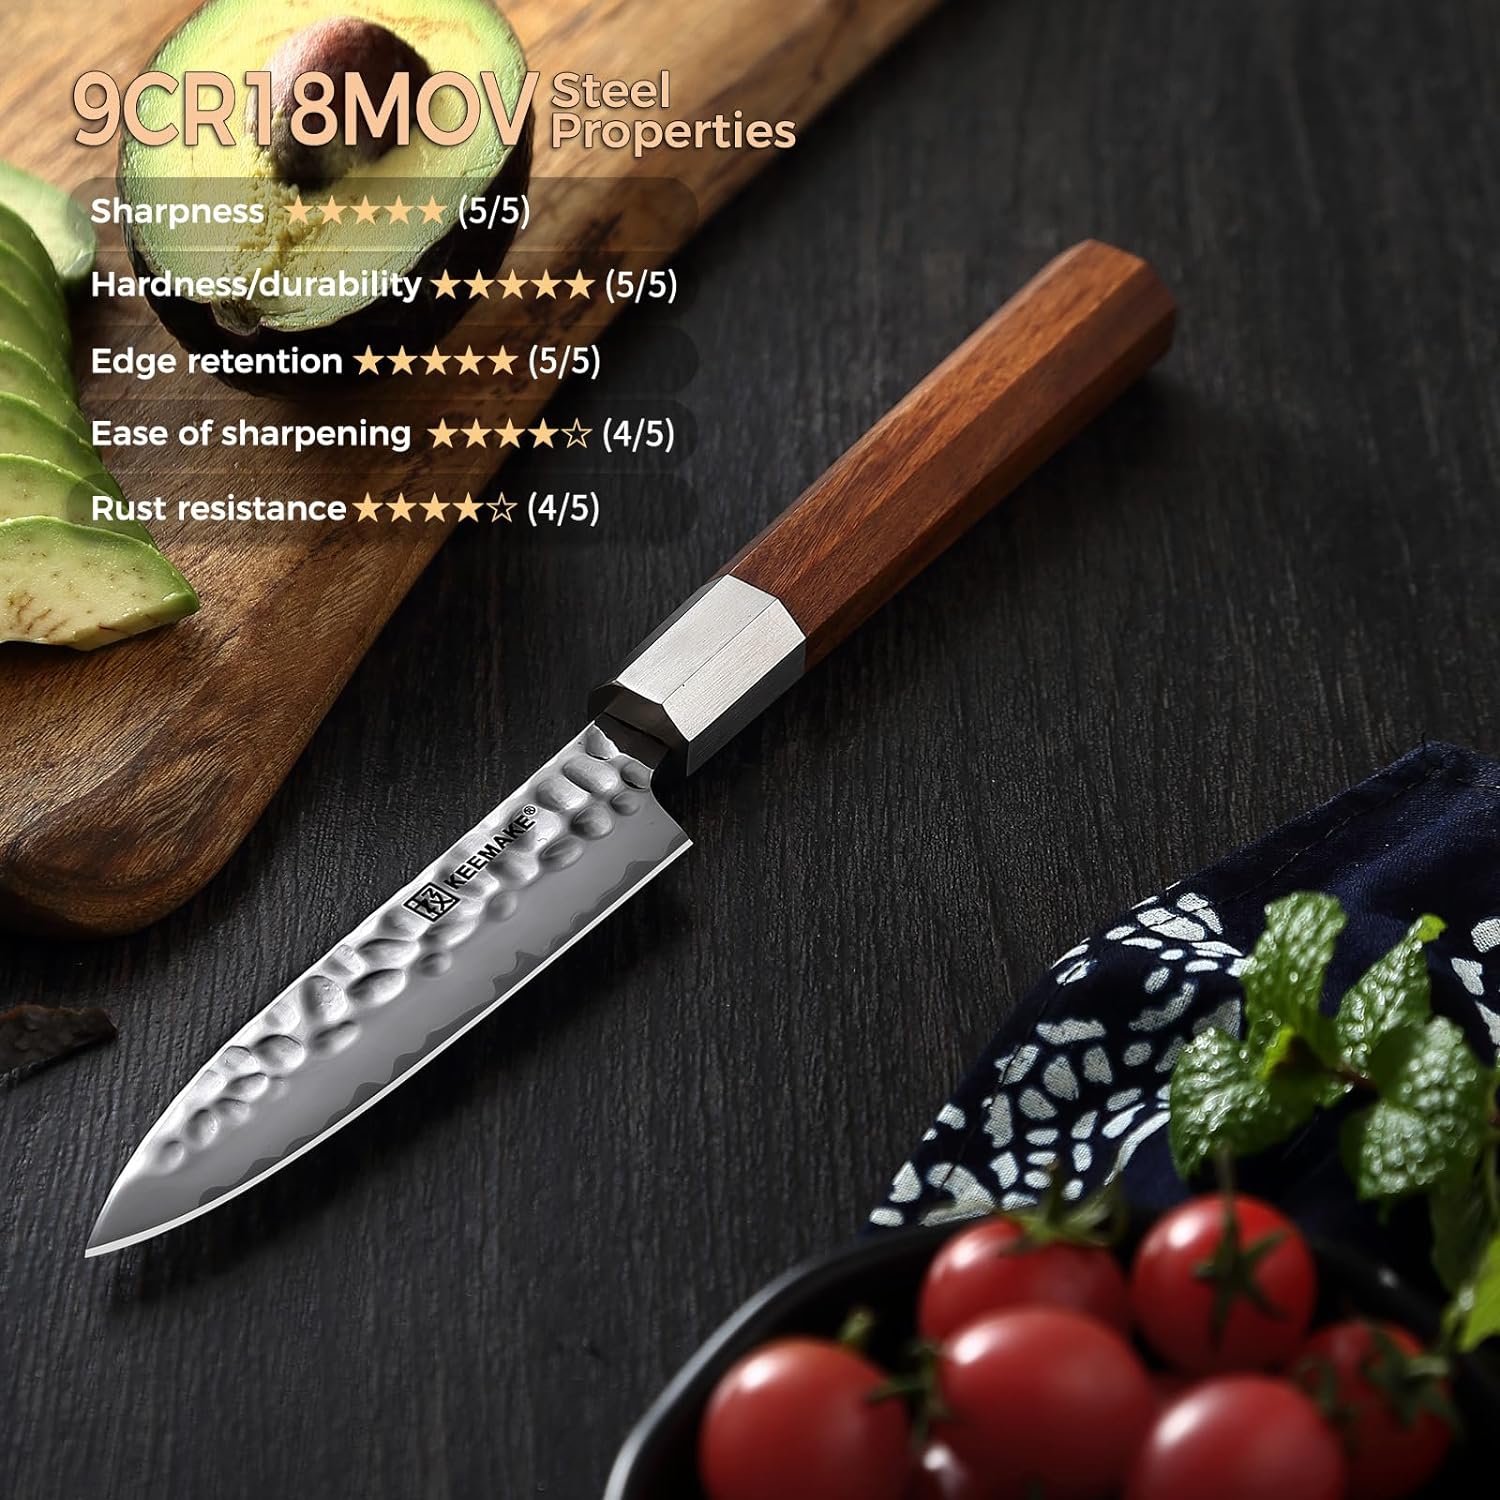 KEEMAKE Kitchen Knife Set of 3pcs, Chef Knife Set with 3-layer Japanese 9CR18MOV Clad Steel Blade